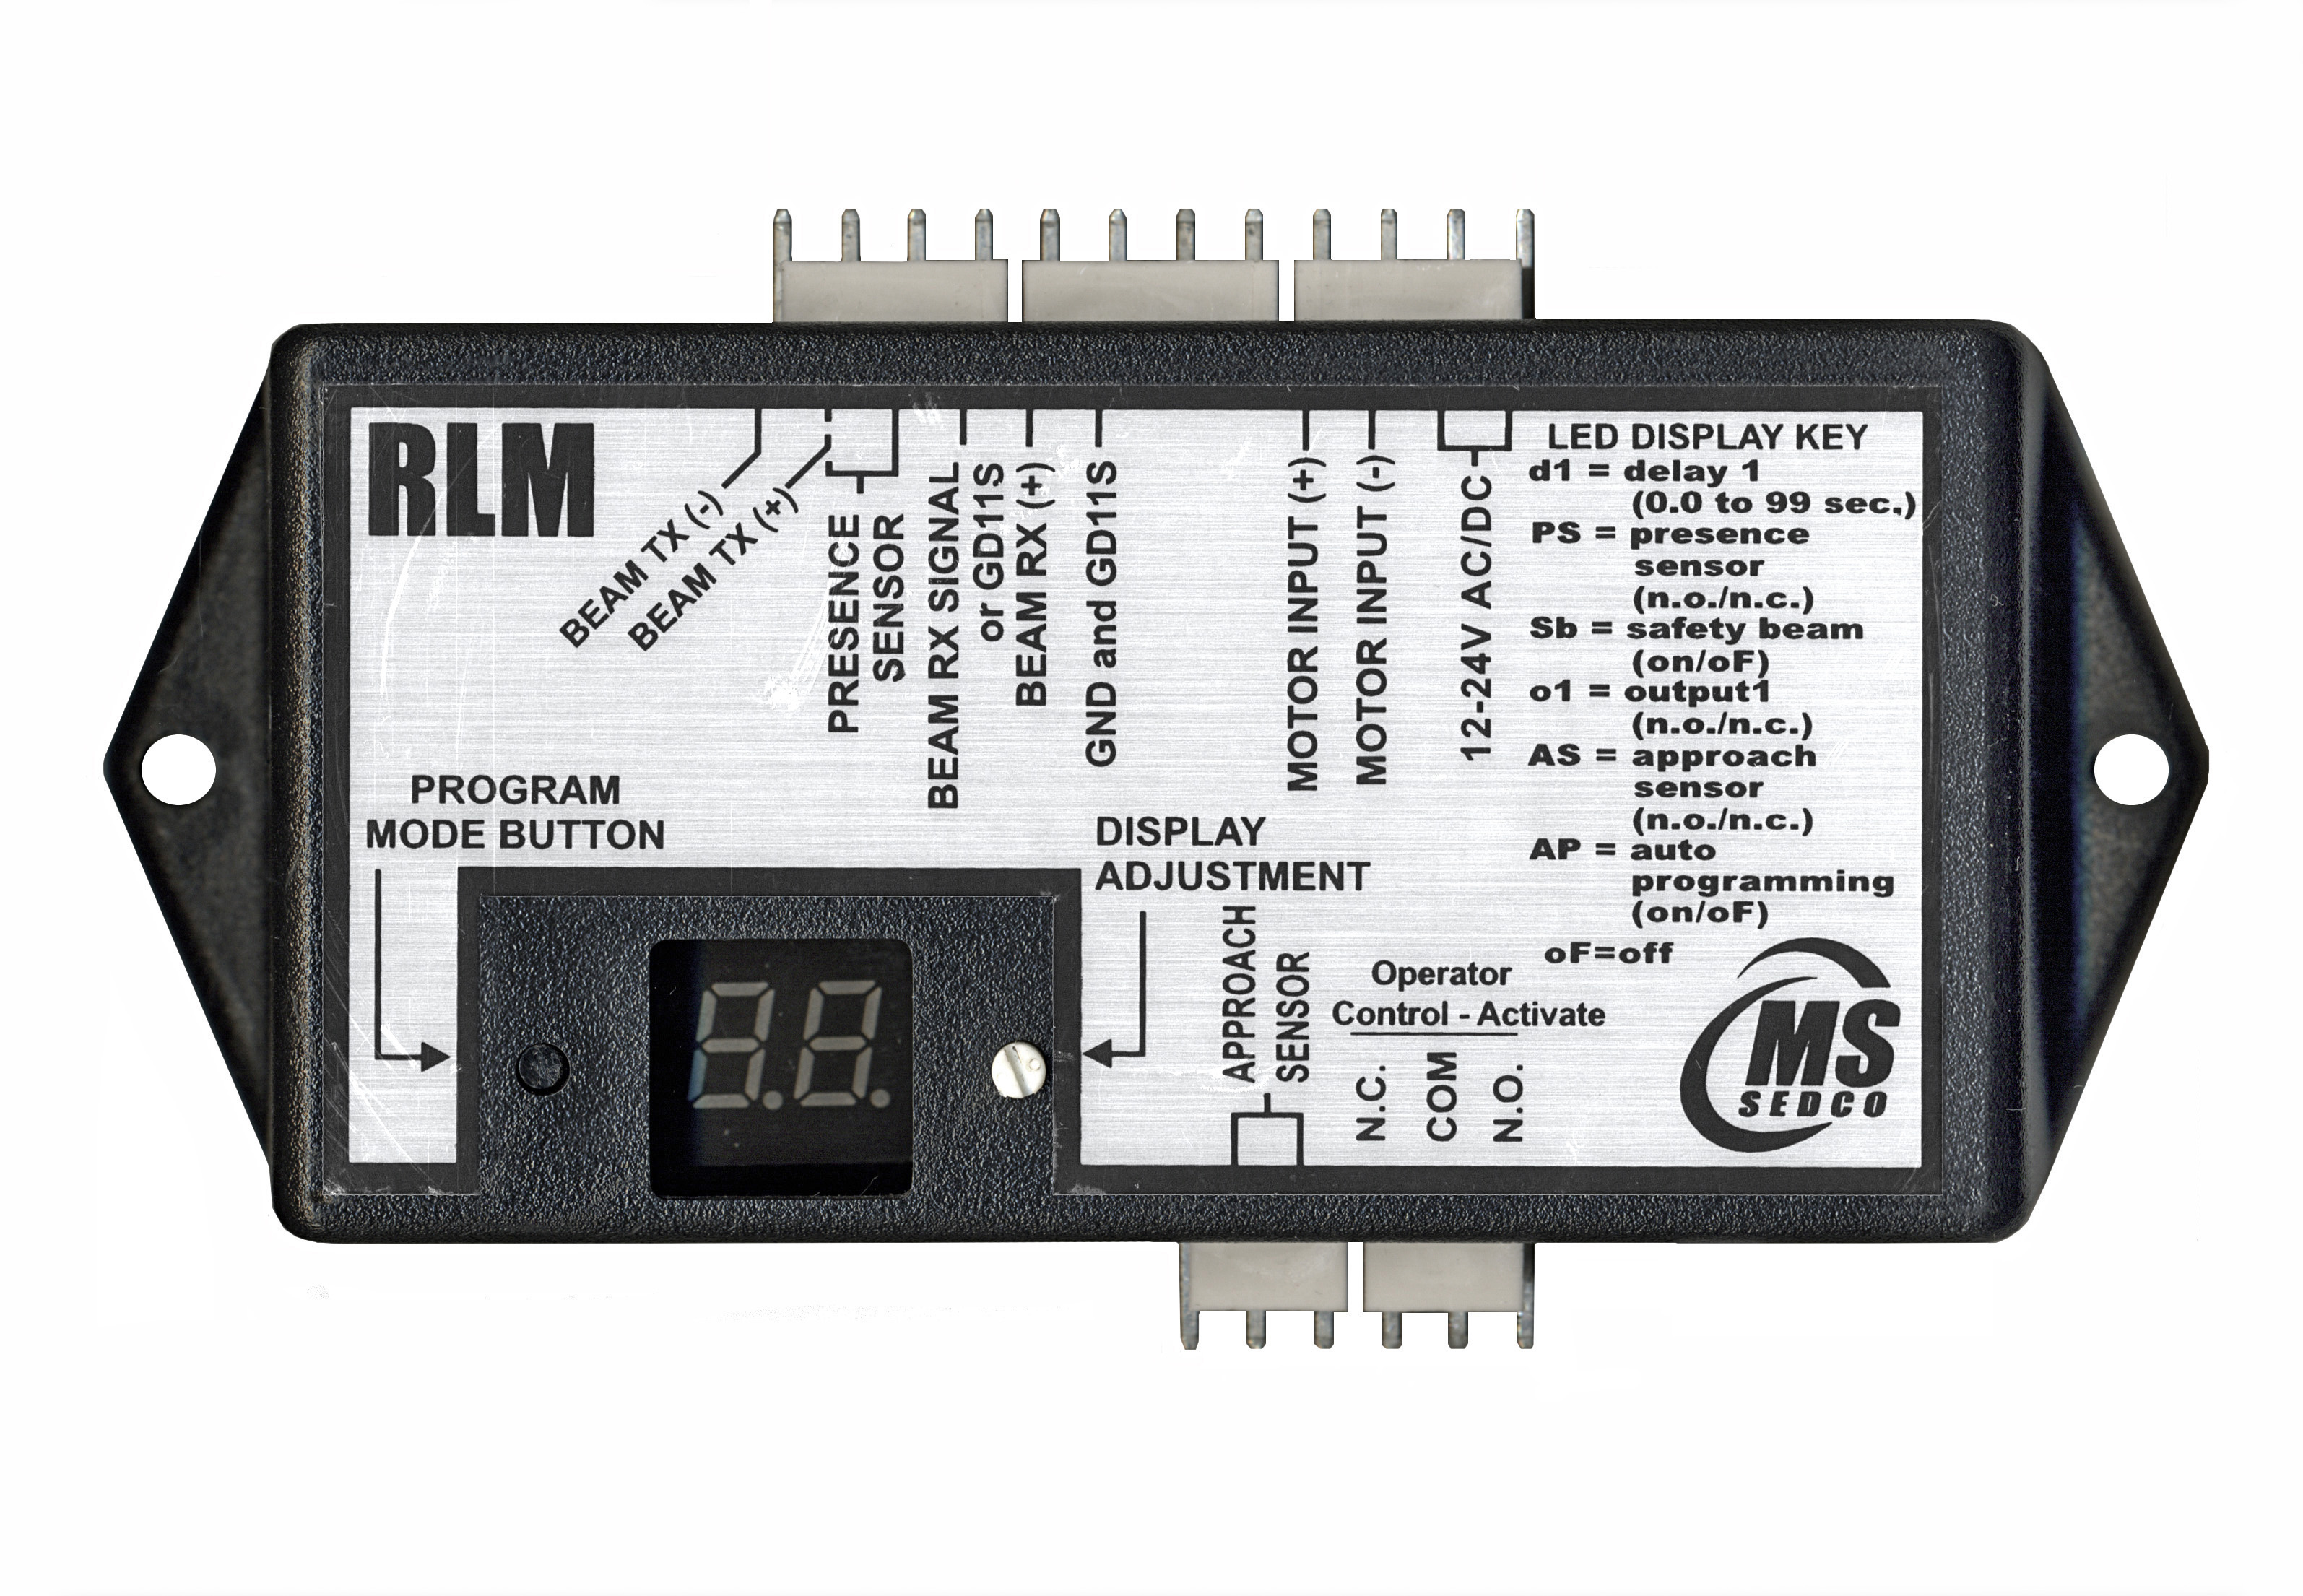 RLM Relay Lockout Module with Optional Safety Beams